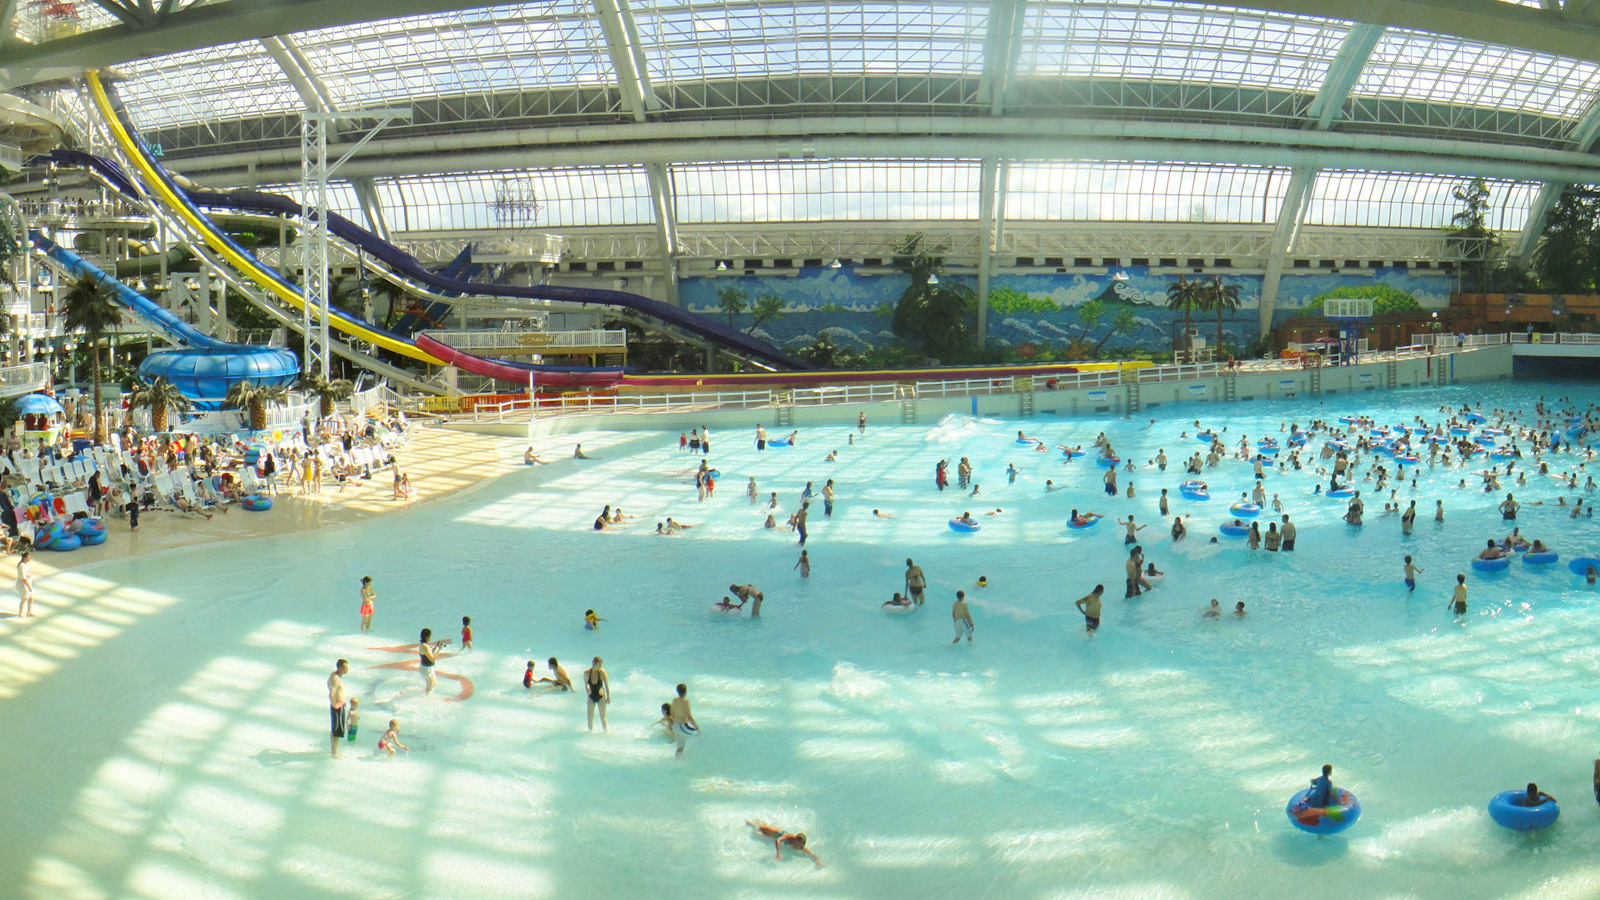 World Waterpark Delivers Waves For Families And Thrill Seekers Alike Whitewater